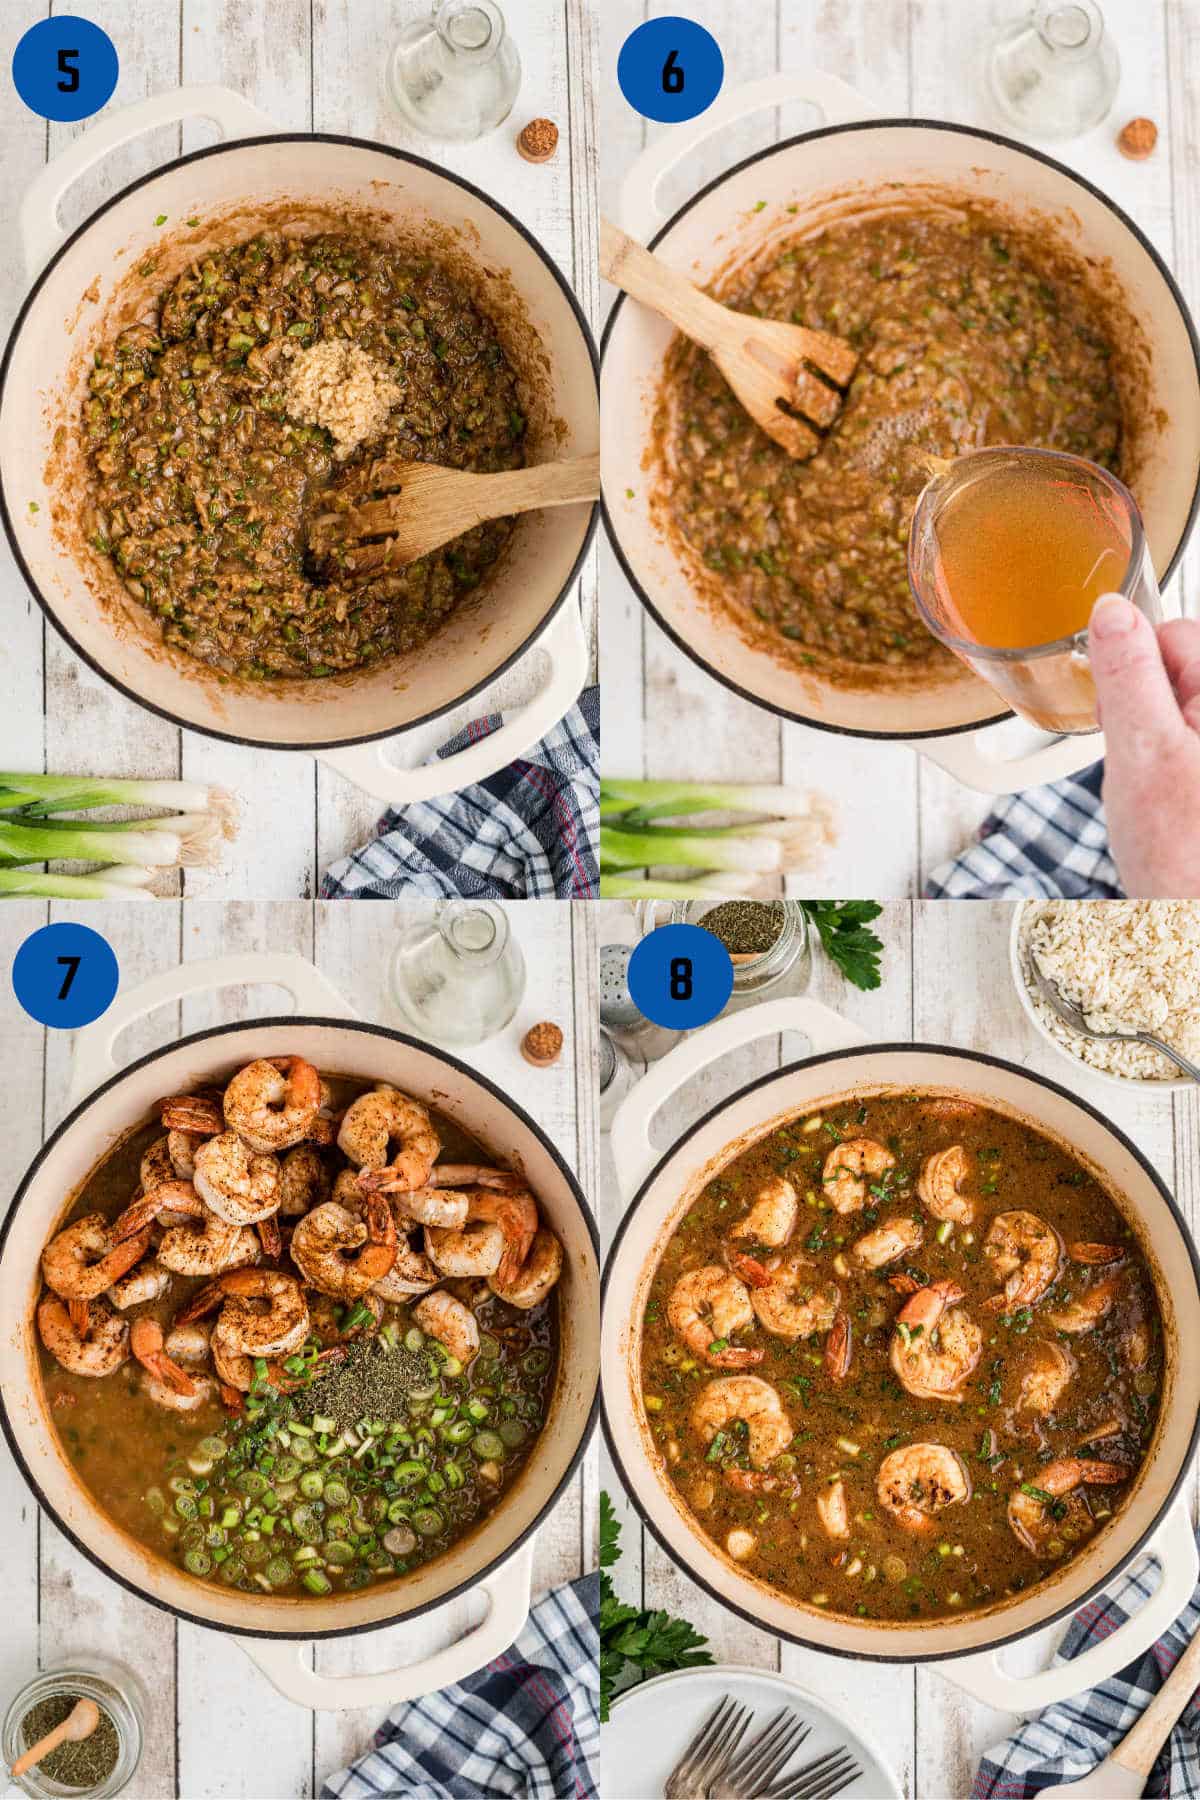 A collage of four images showing how to make shrimp etouffee, steps 5 through 8.